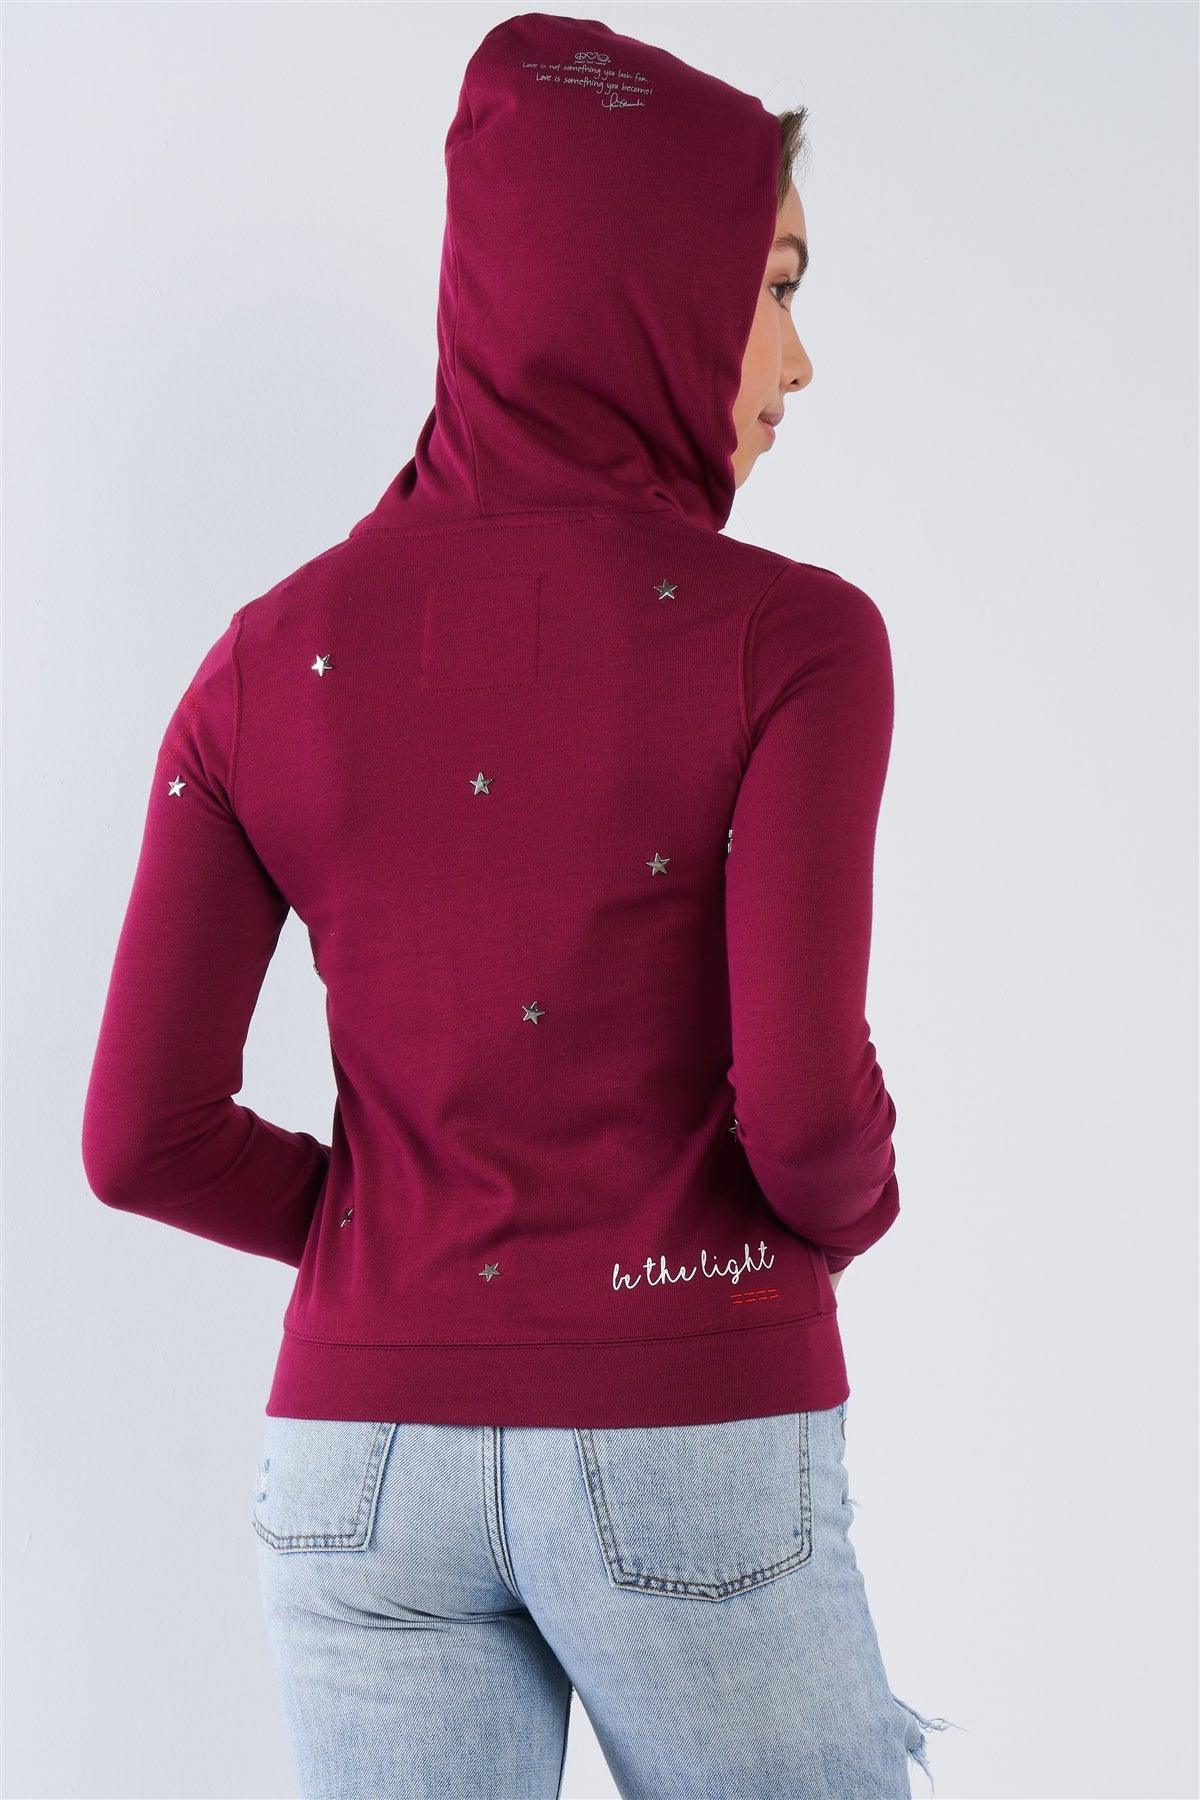 Plum Long Sleeve "Be The Light" Graphic Star Studded Comfy Zip Up Hoodie